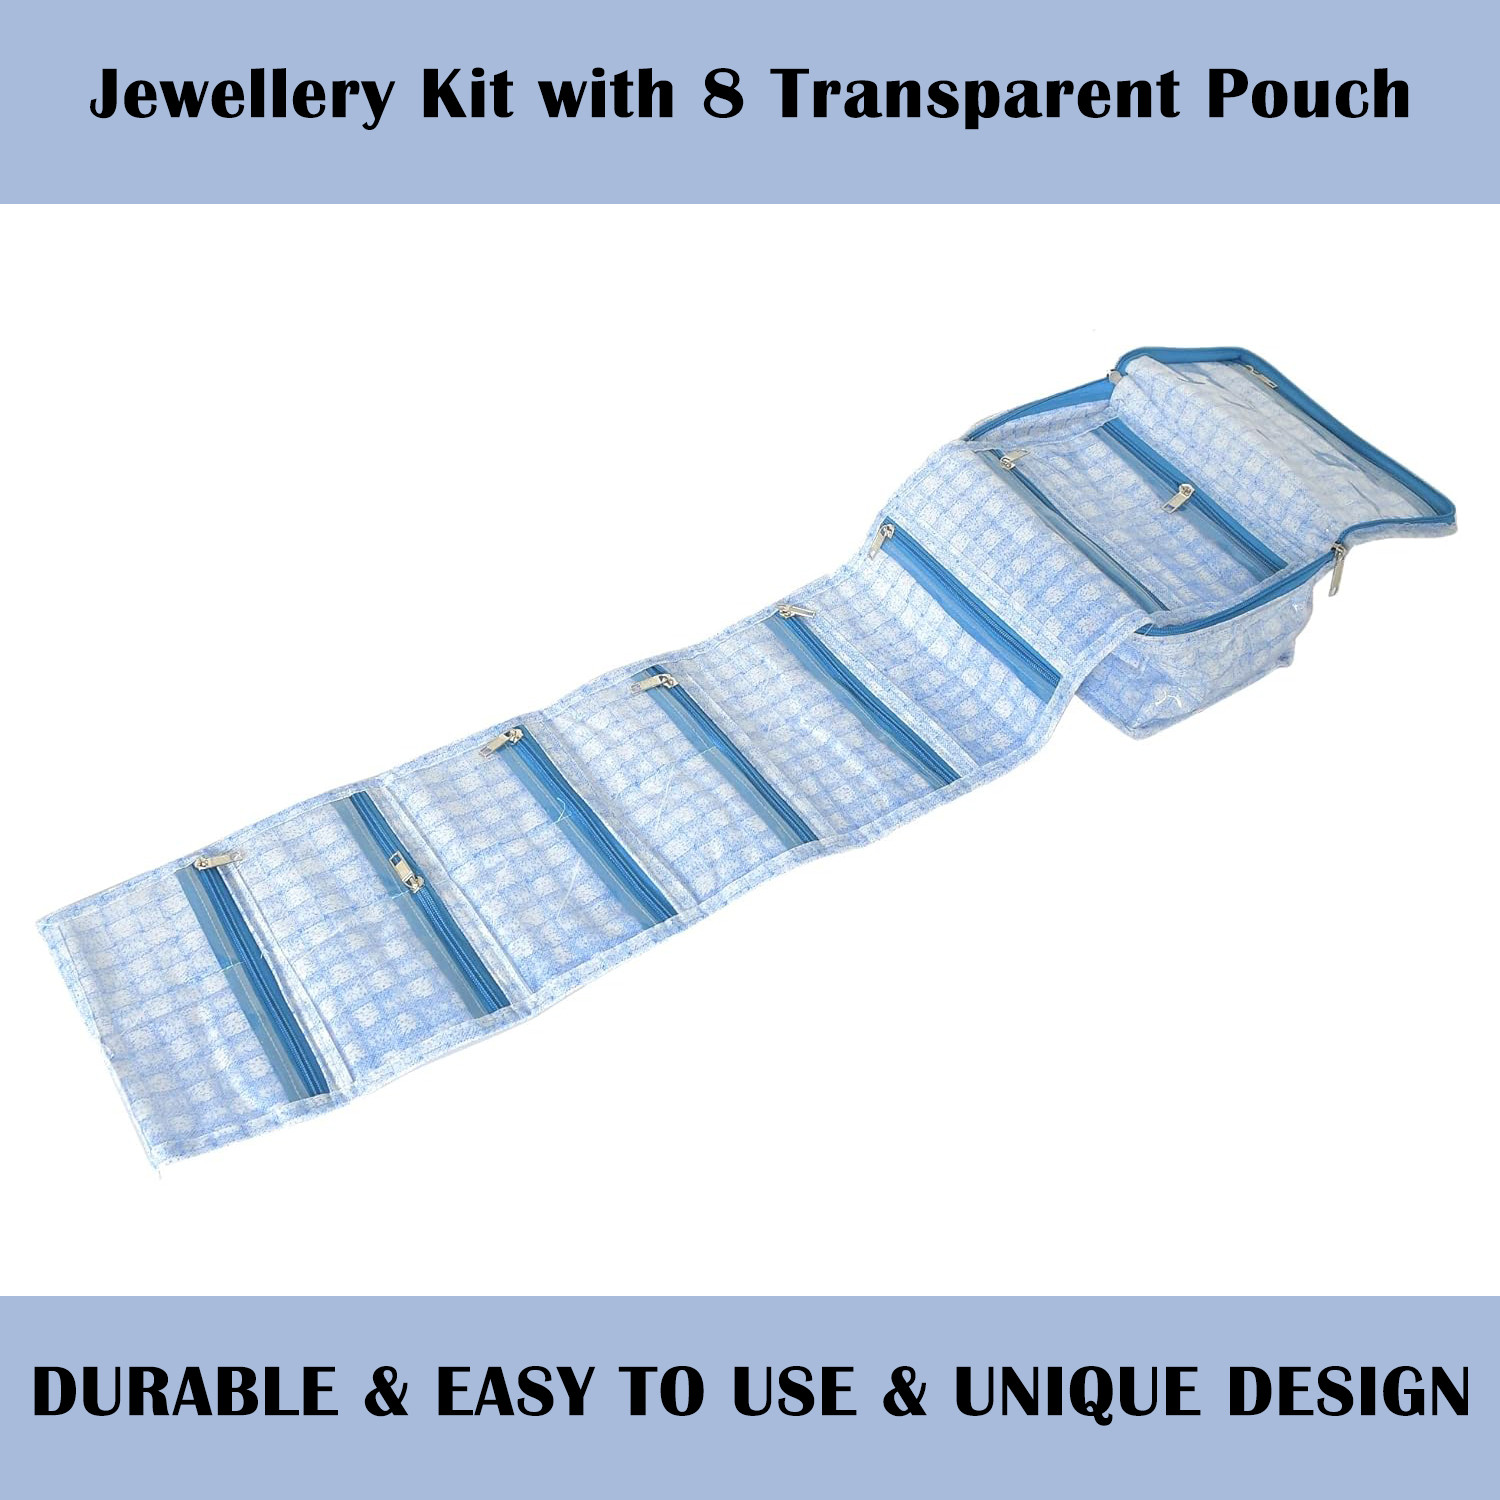 Kuber Industries Jewellery Kit | Check Design Vanity Box for woman | Laminated Jewellery Kit for woman | Jewellery Kit with 8 Transparent Pouch | Blue